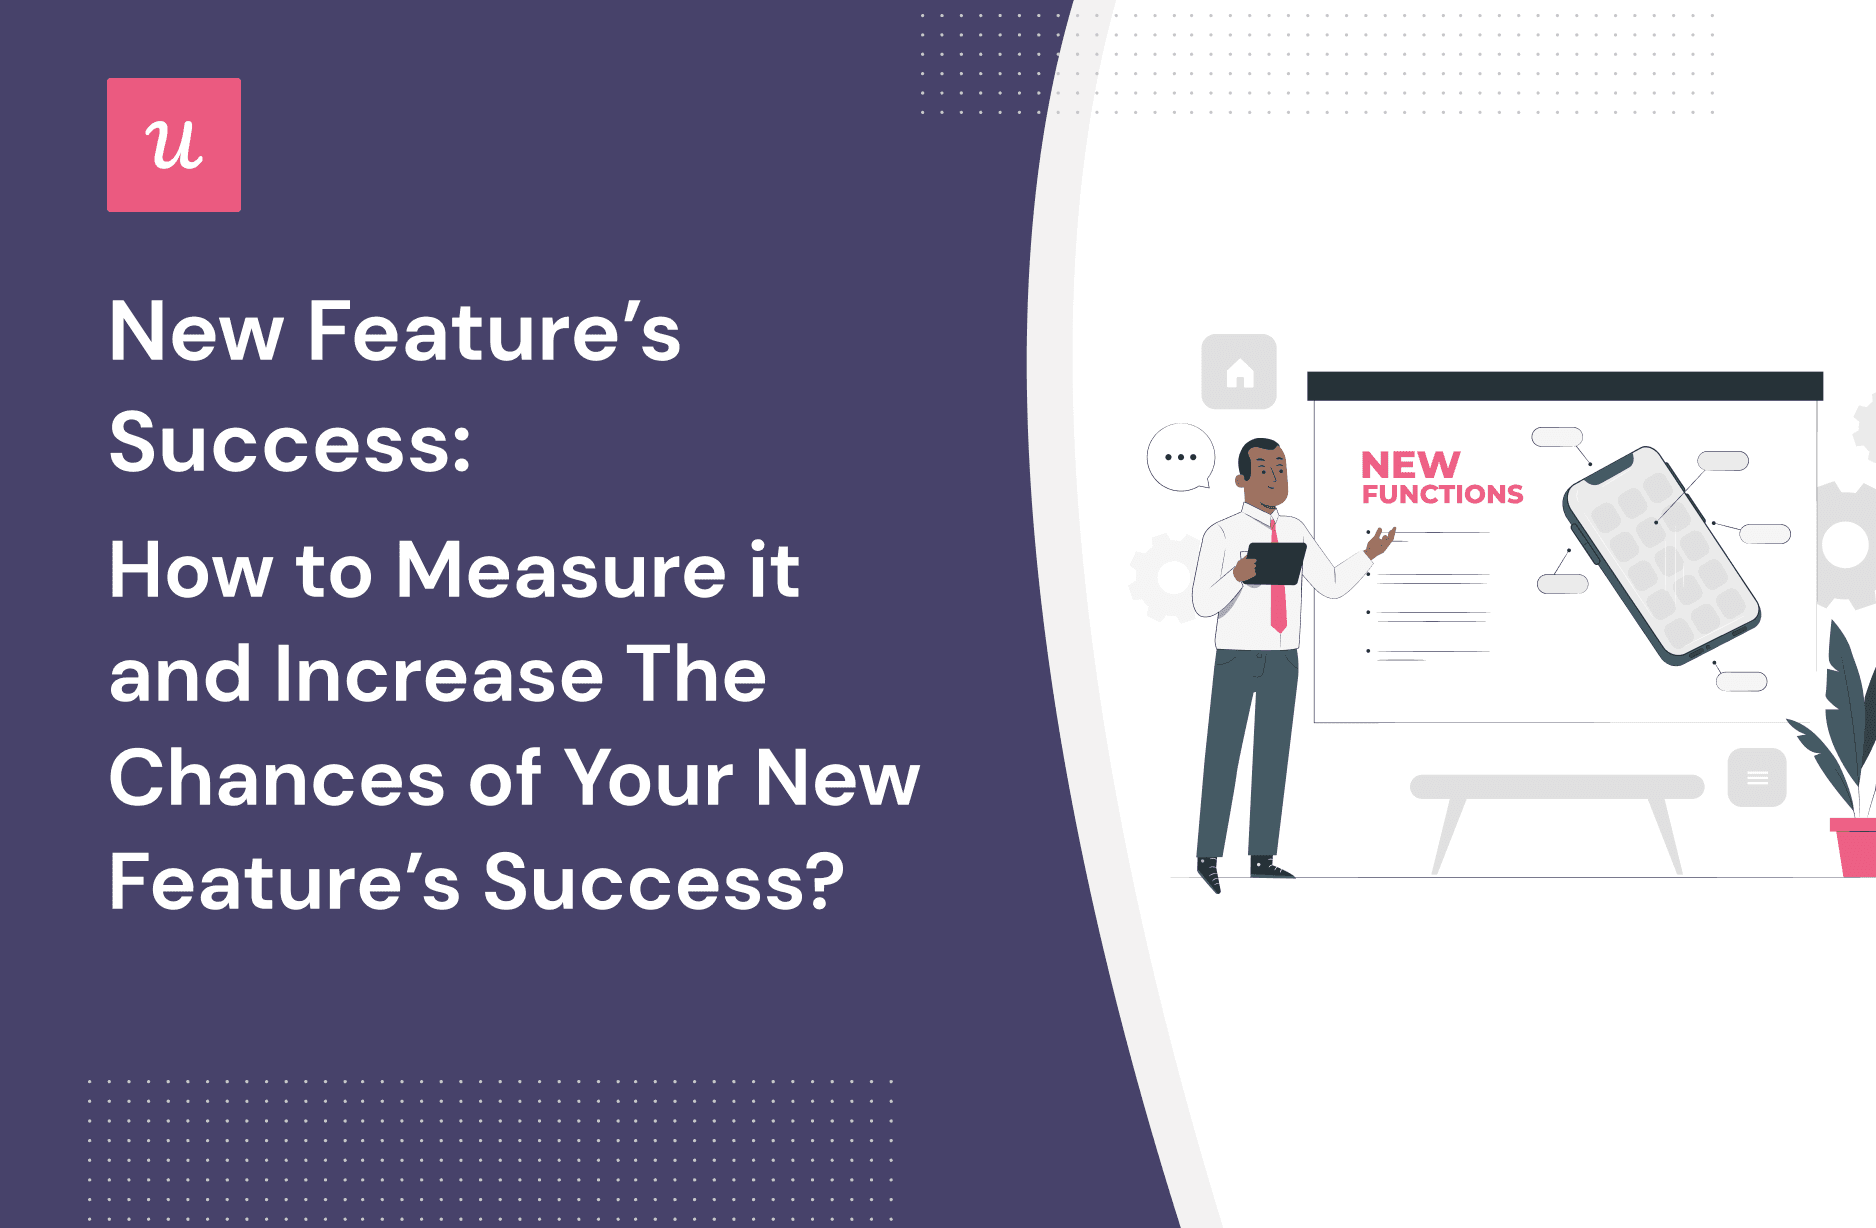 New Feature’s Success: How To Measure It and Increase the Chances of Your New Feature’s Success? cover